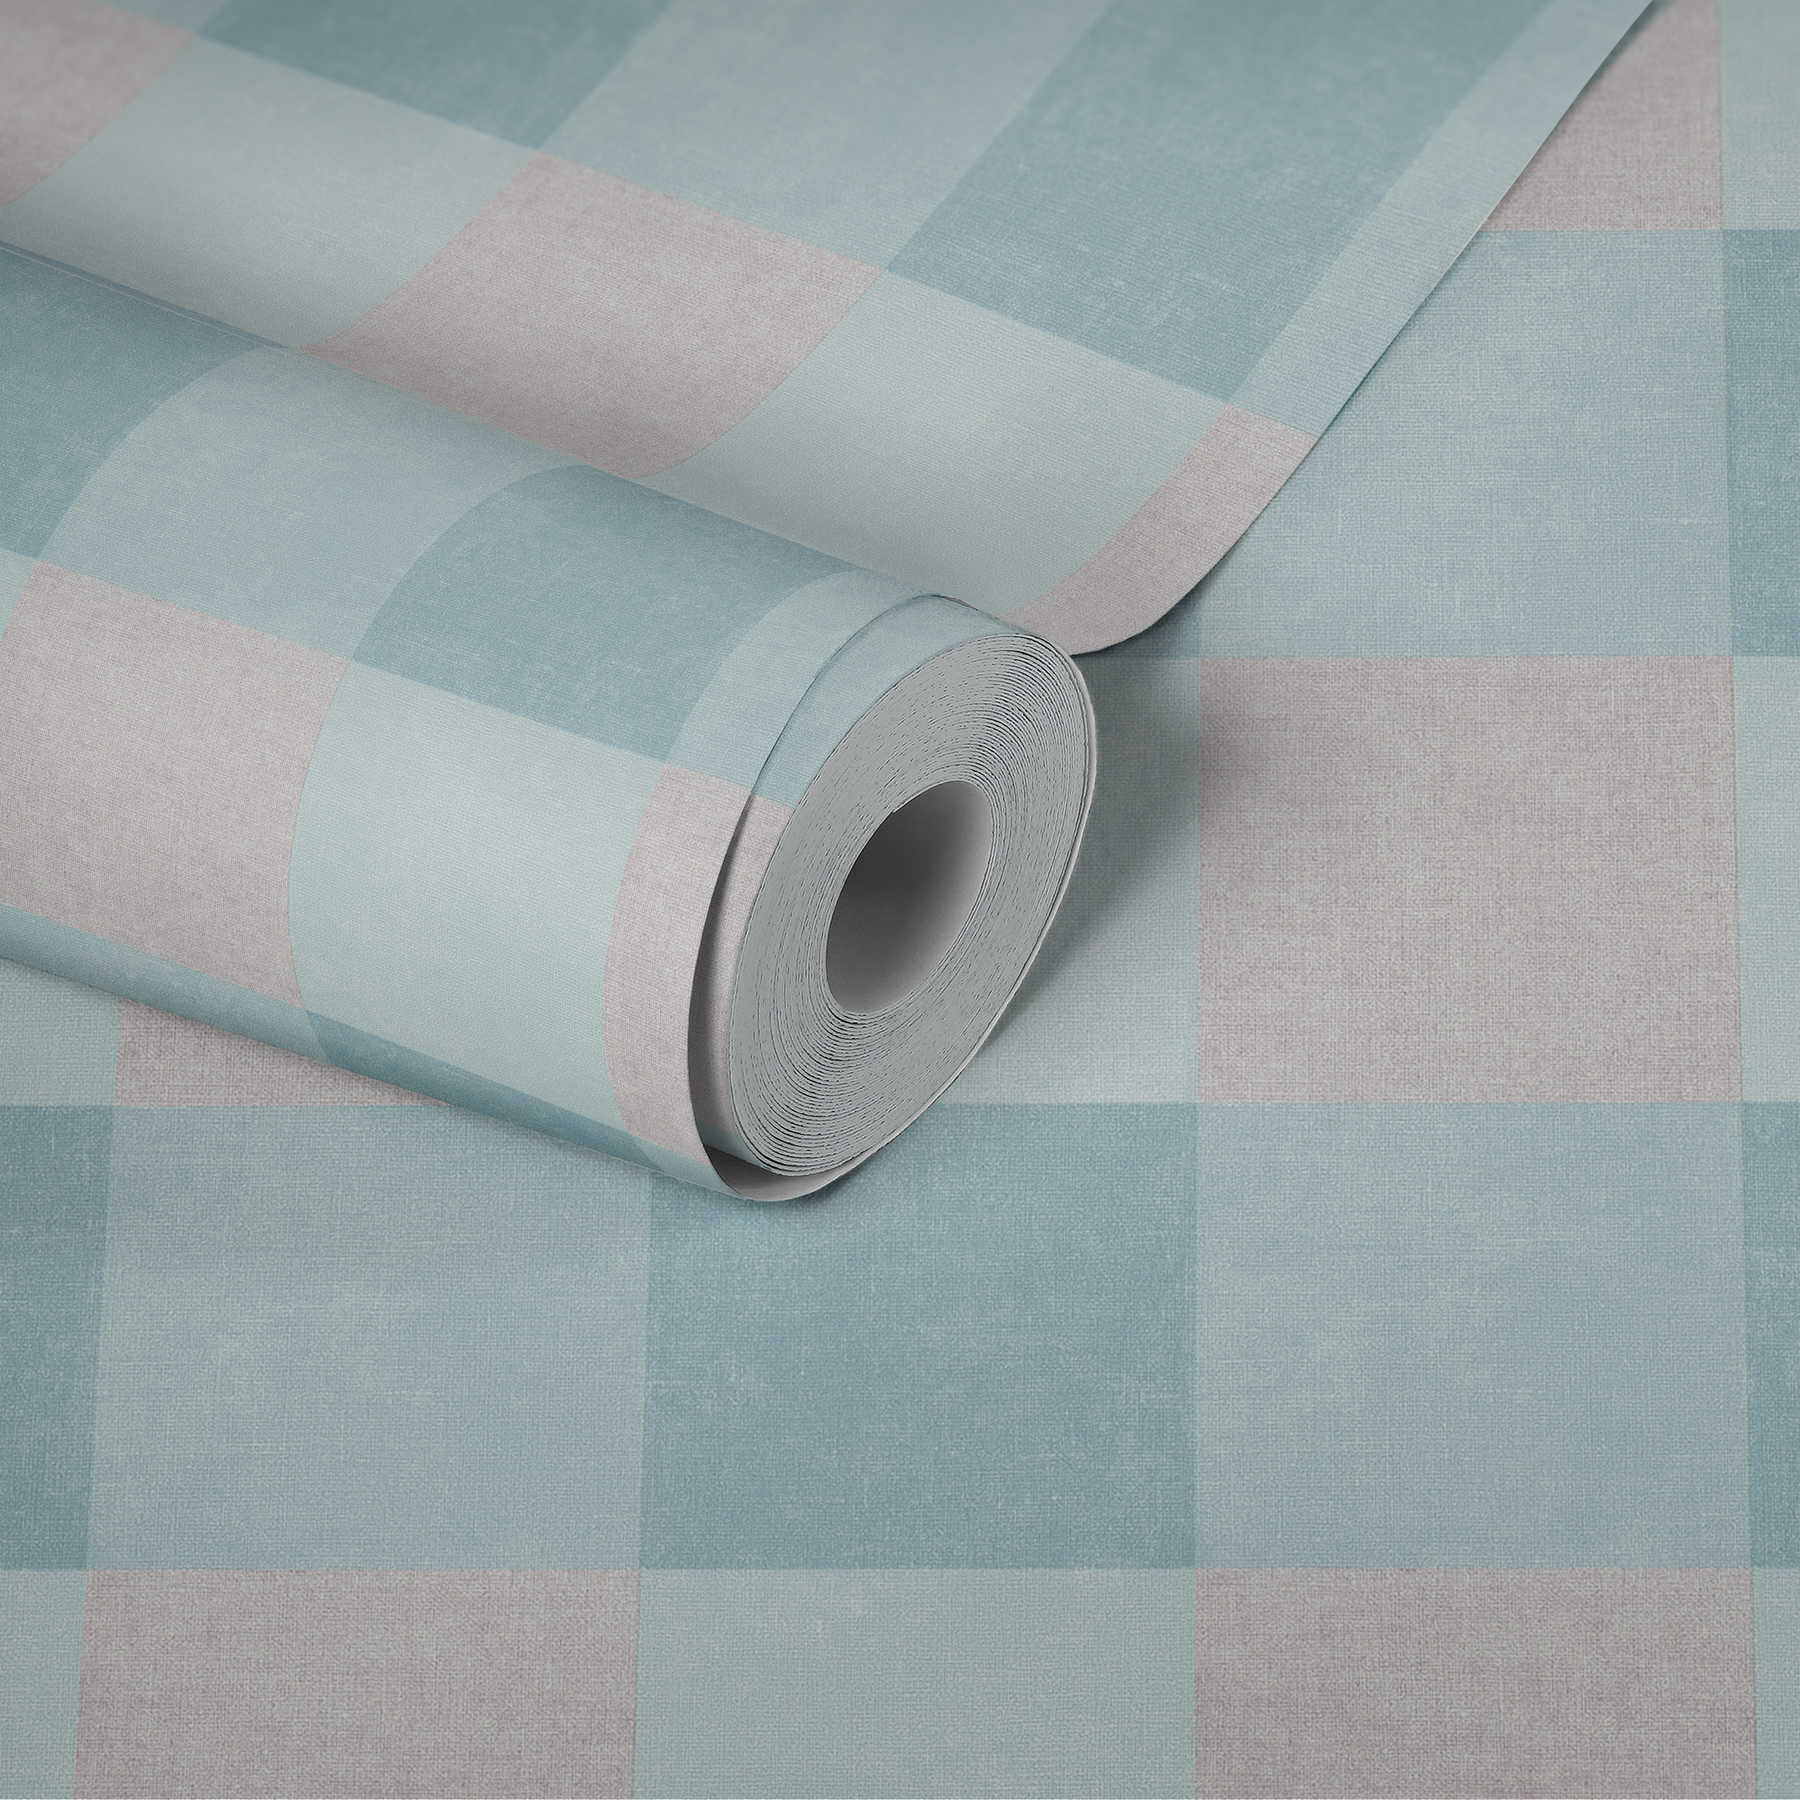             Plaid non-woven wallpaper with linen look - blue, grey
        